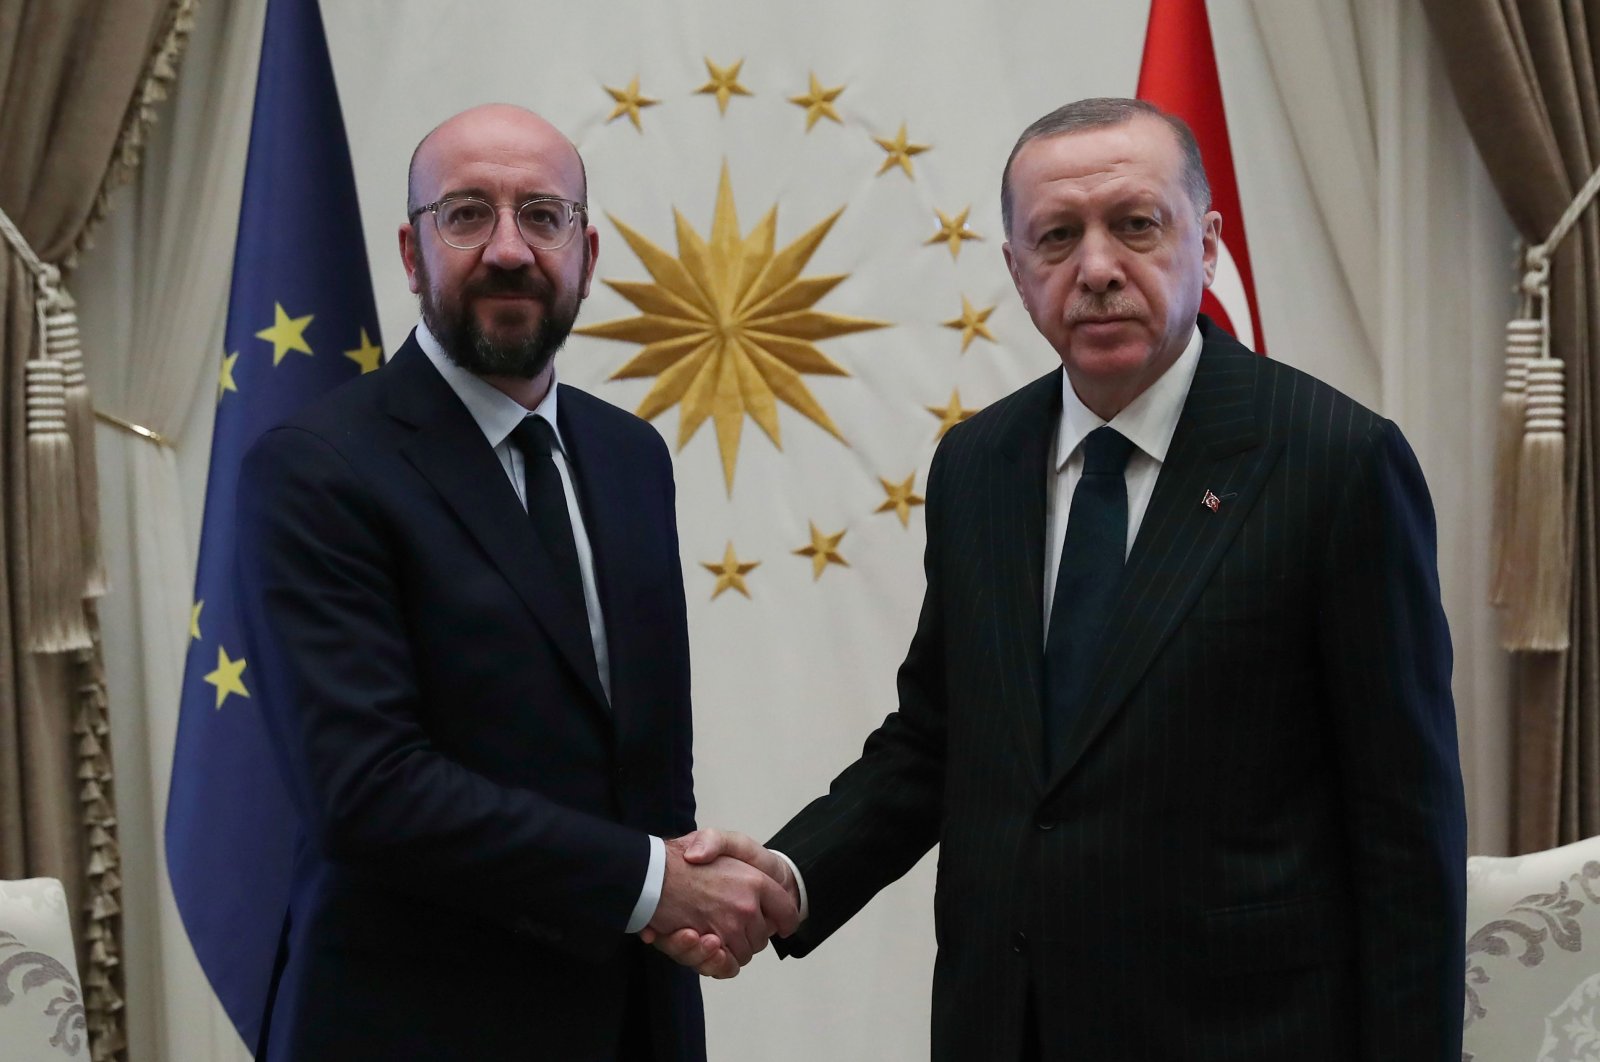 President Recep Tayyip Erdoğan (R) shaking hands with European Council’s President Charles Michel (L) at the Presidential Complex in Ankara, on March 4, 2020. (AFP Photo)